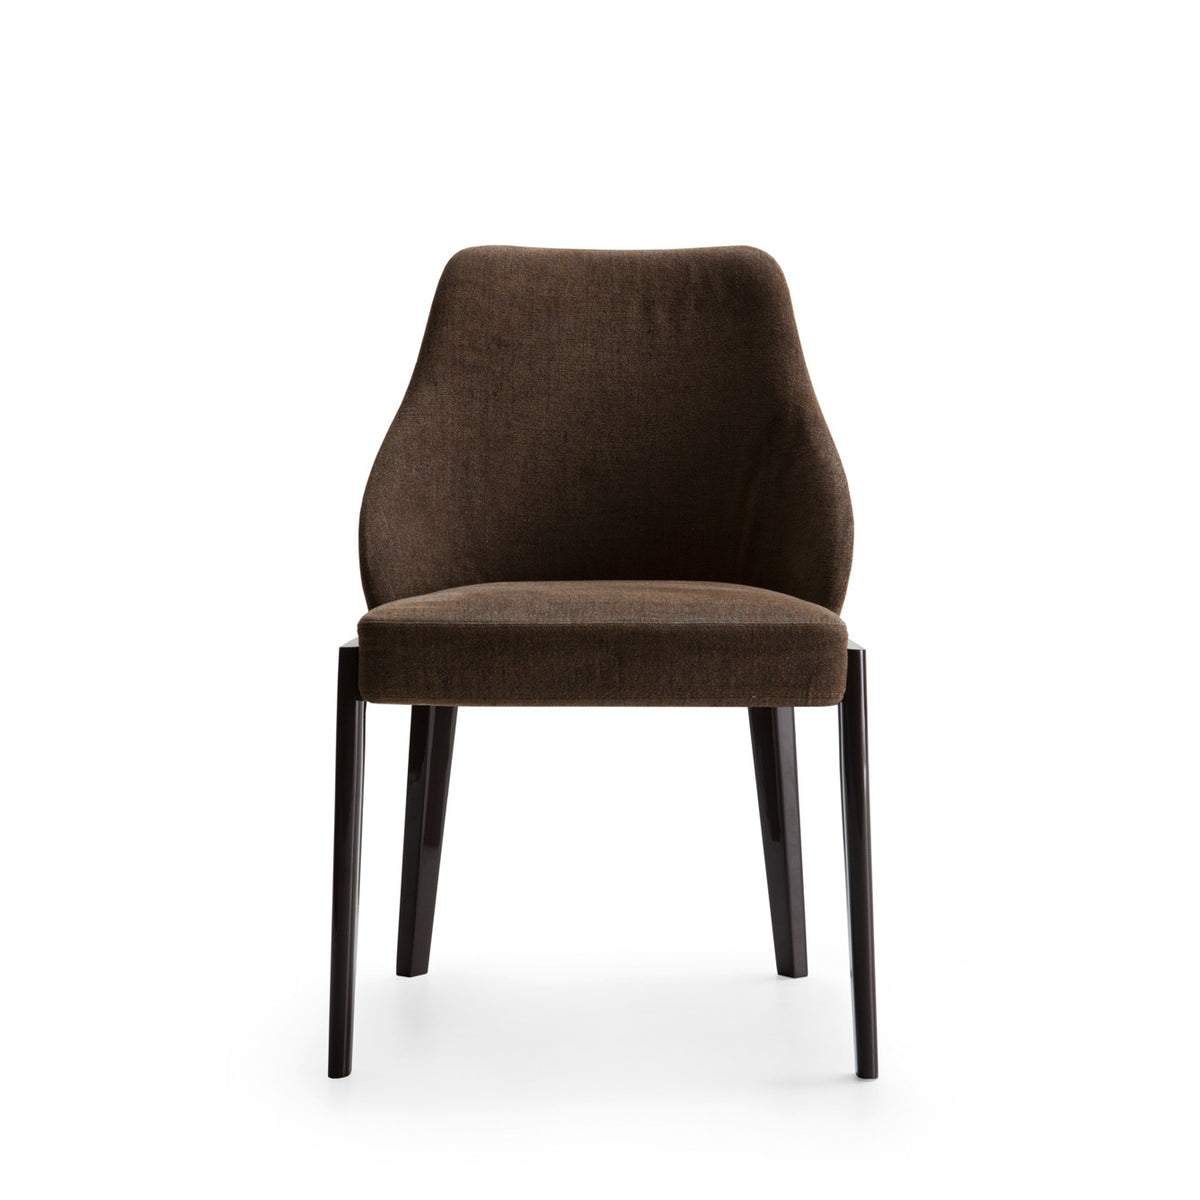 Chelsea Dining chair Molteni 